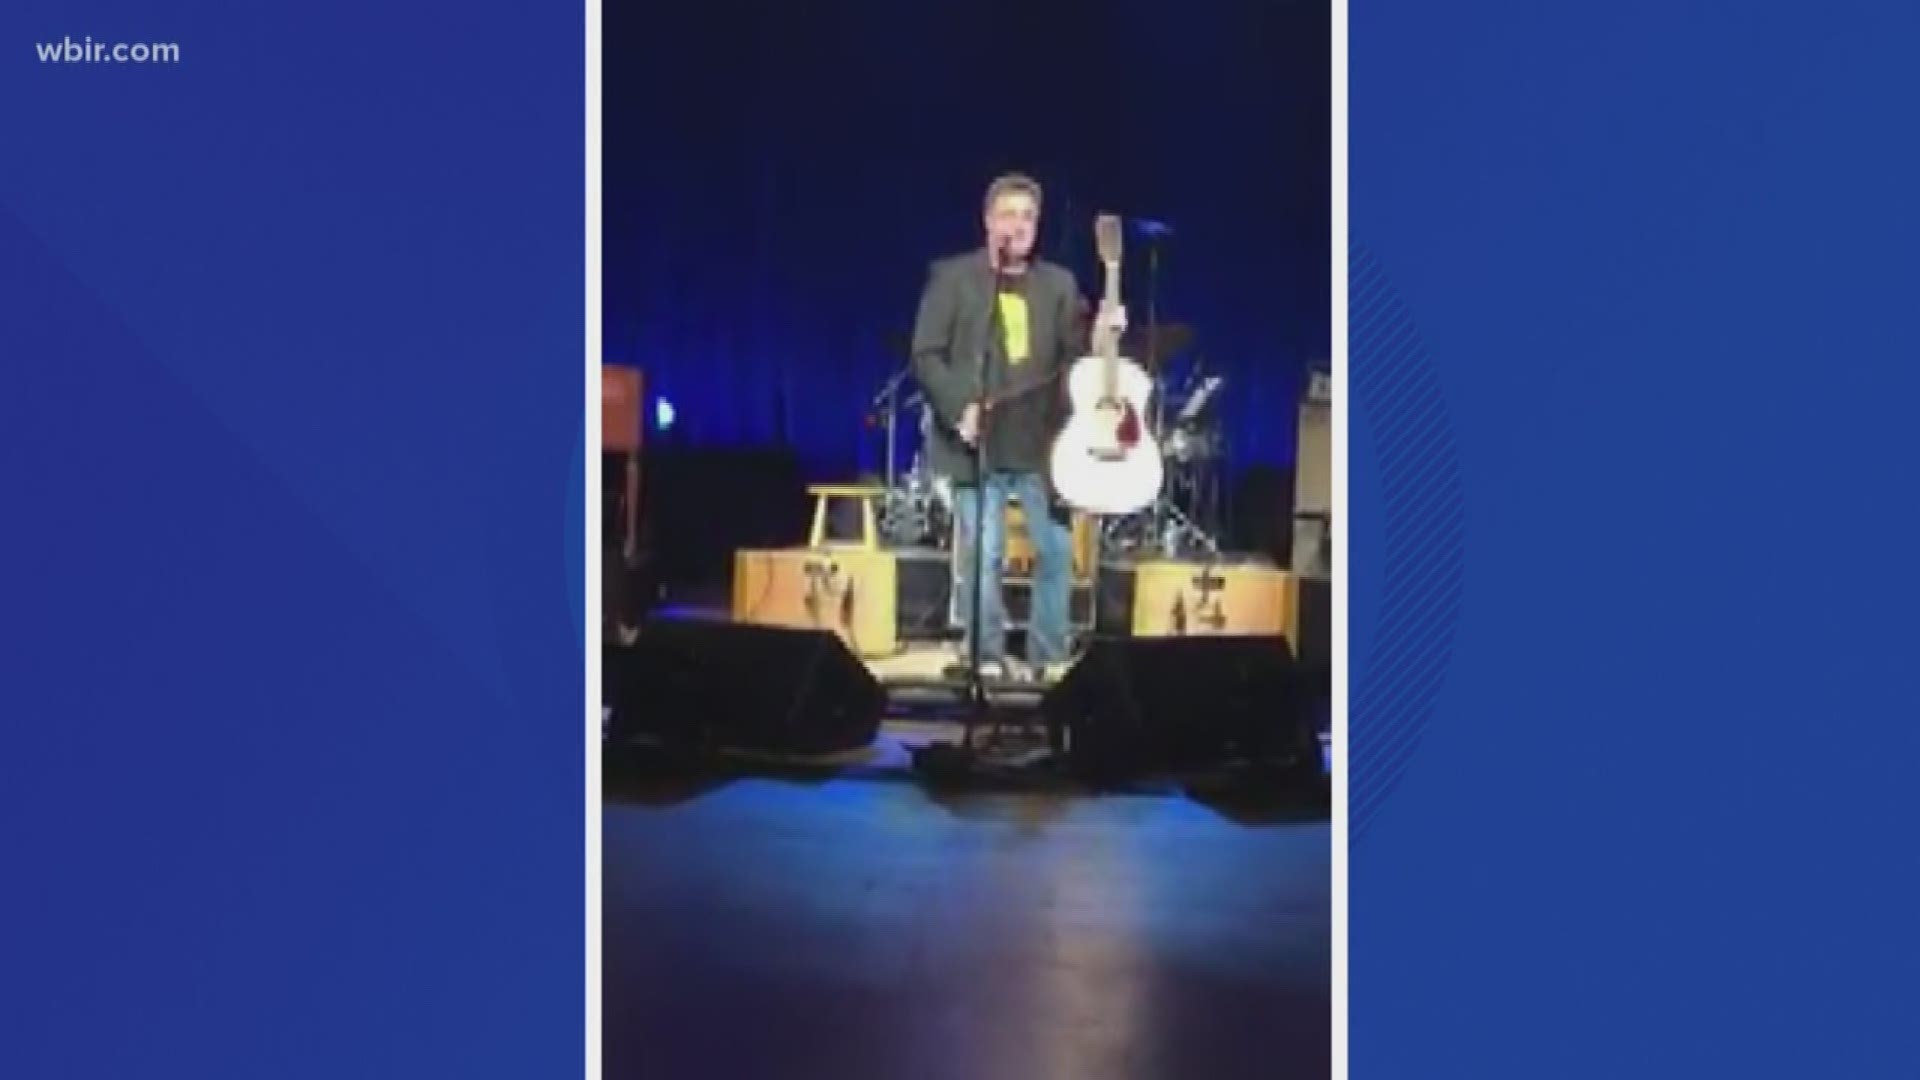 Vince Gill saw a sign during his show at the Knoxville Auditorium on Aug. 7 from one of his most devoted fans, Sarah, a 94 year old from the Tri-Cities. The sign said Vince's concert was on her 'Bucket List'. Aug. 8, 2019-4pm.